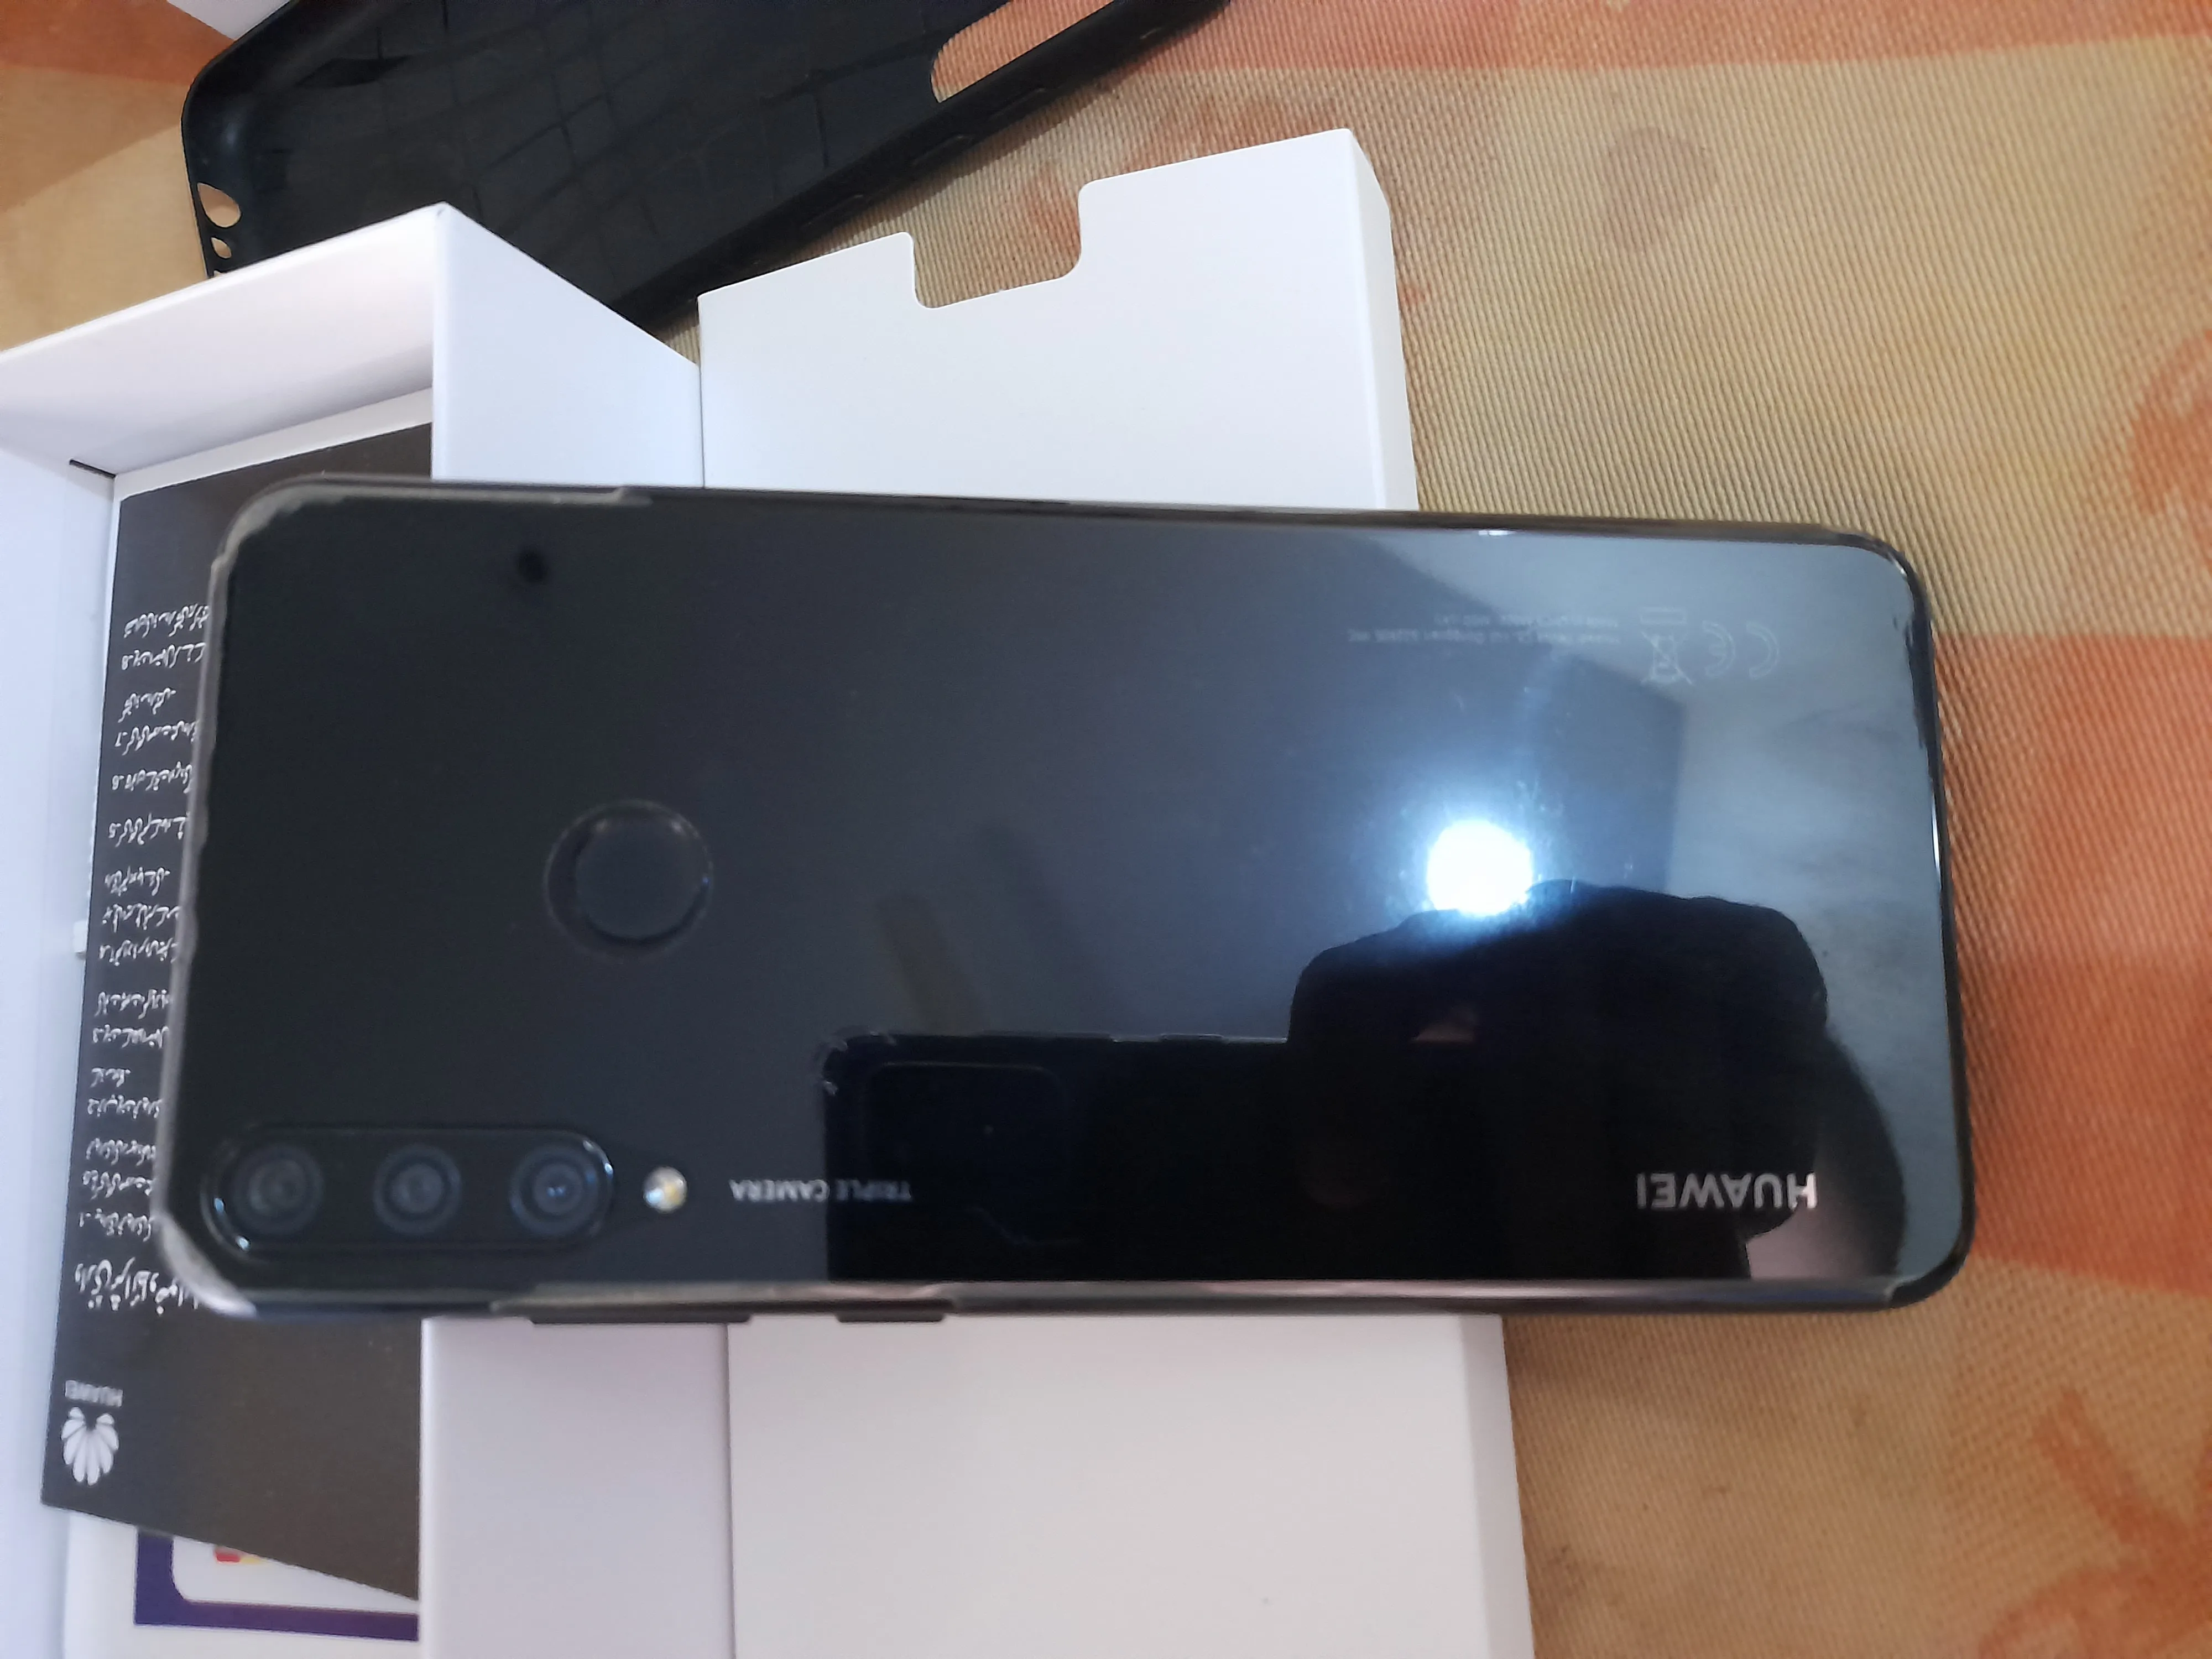 Huawei y6P for sale - photo 1